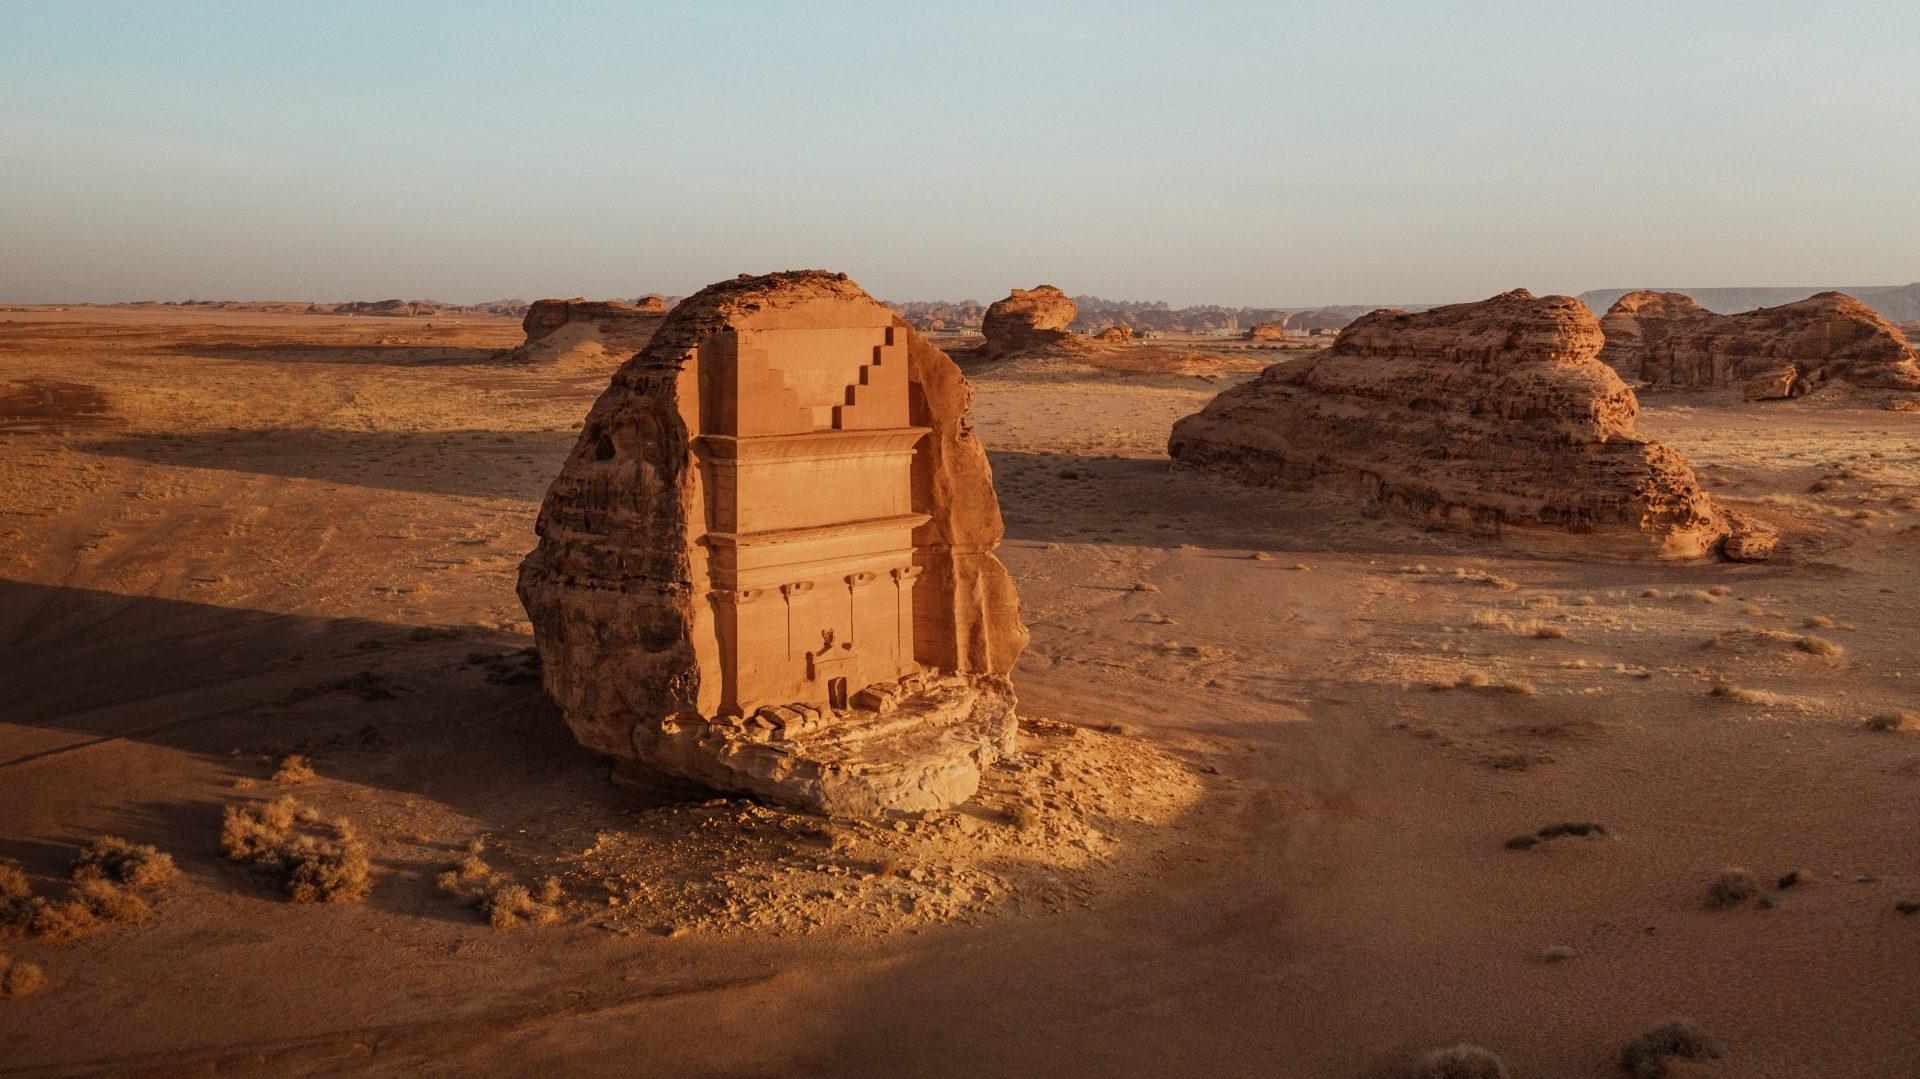 72 hours in AlUla: Where to eat, sleep and play-image